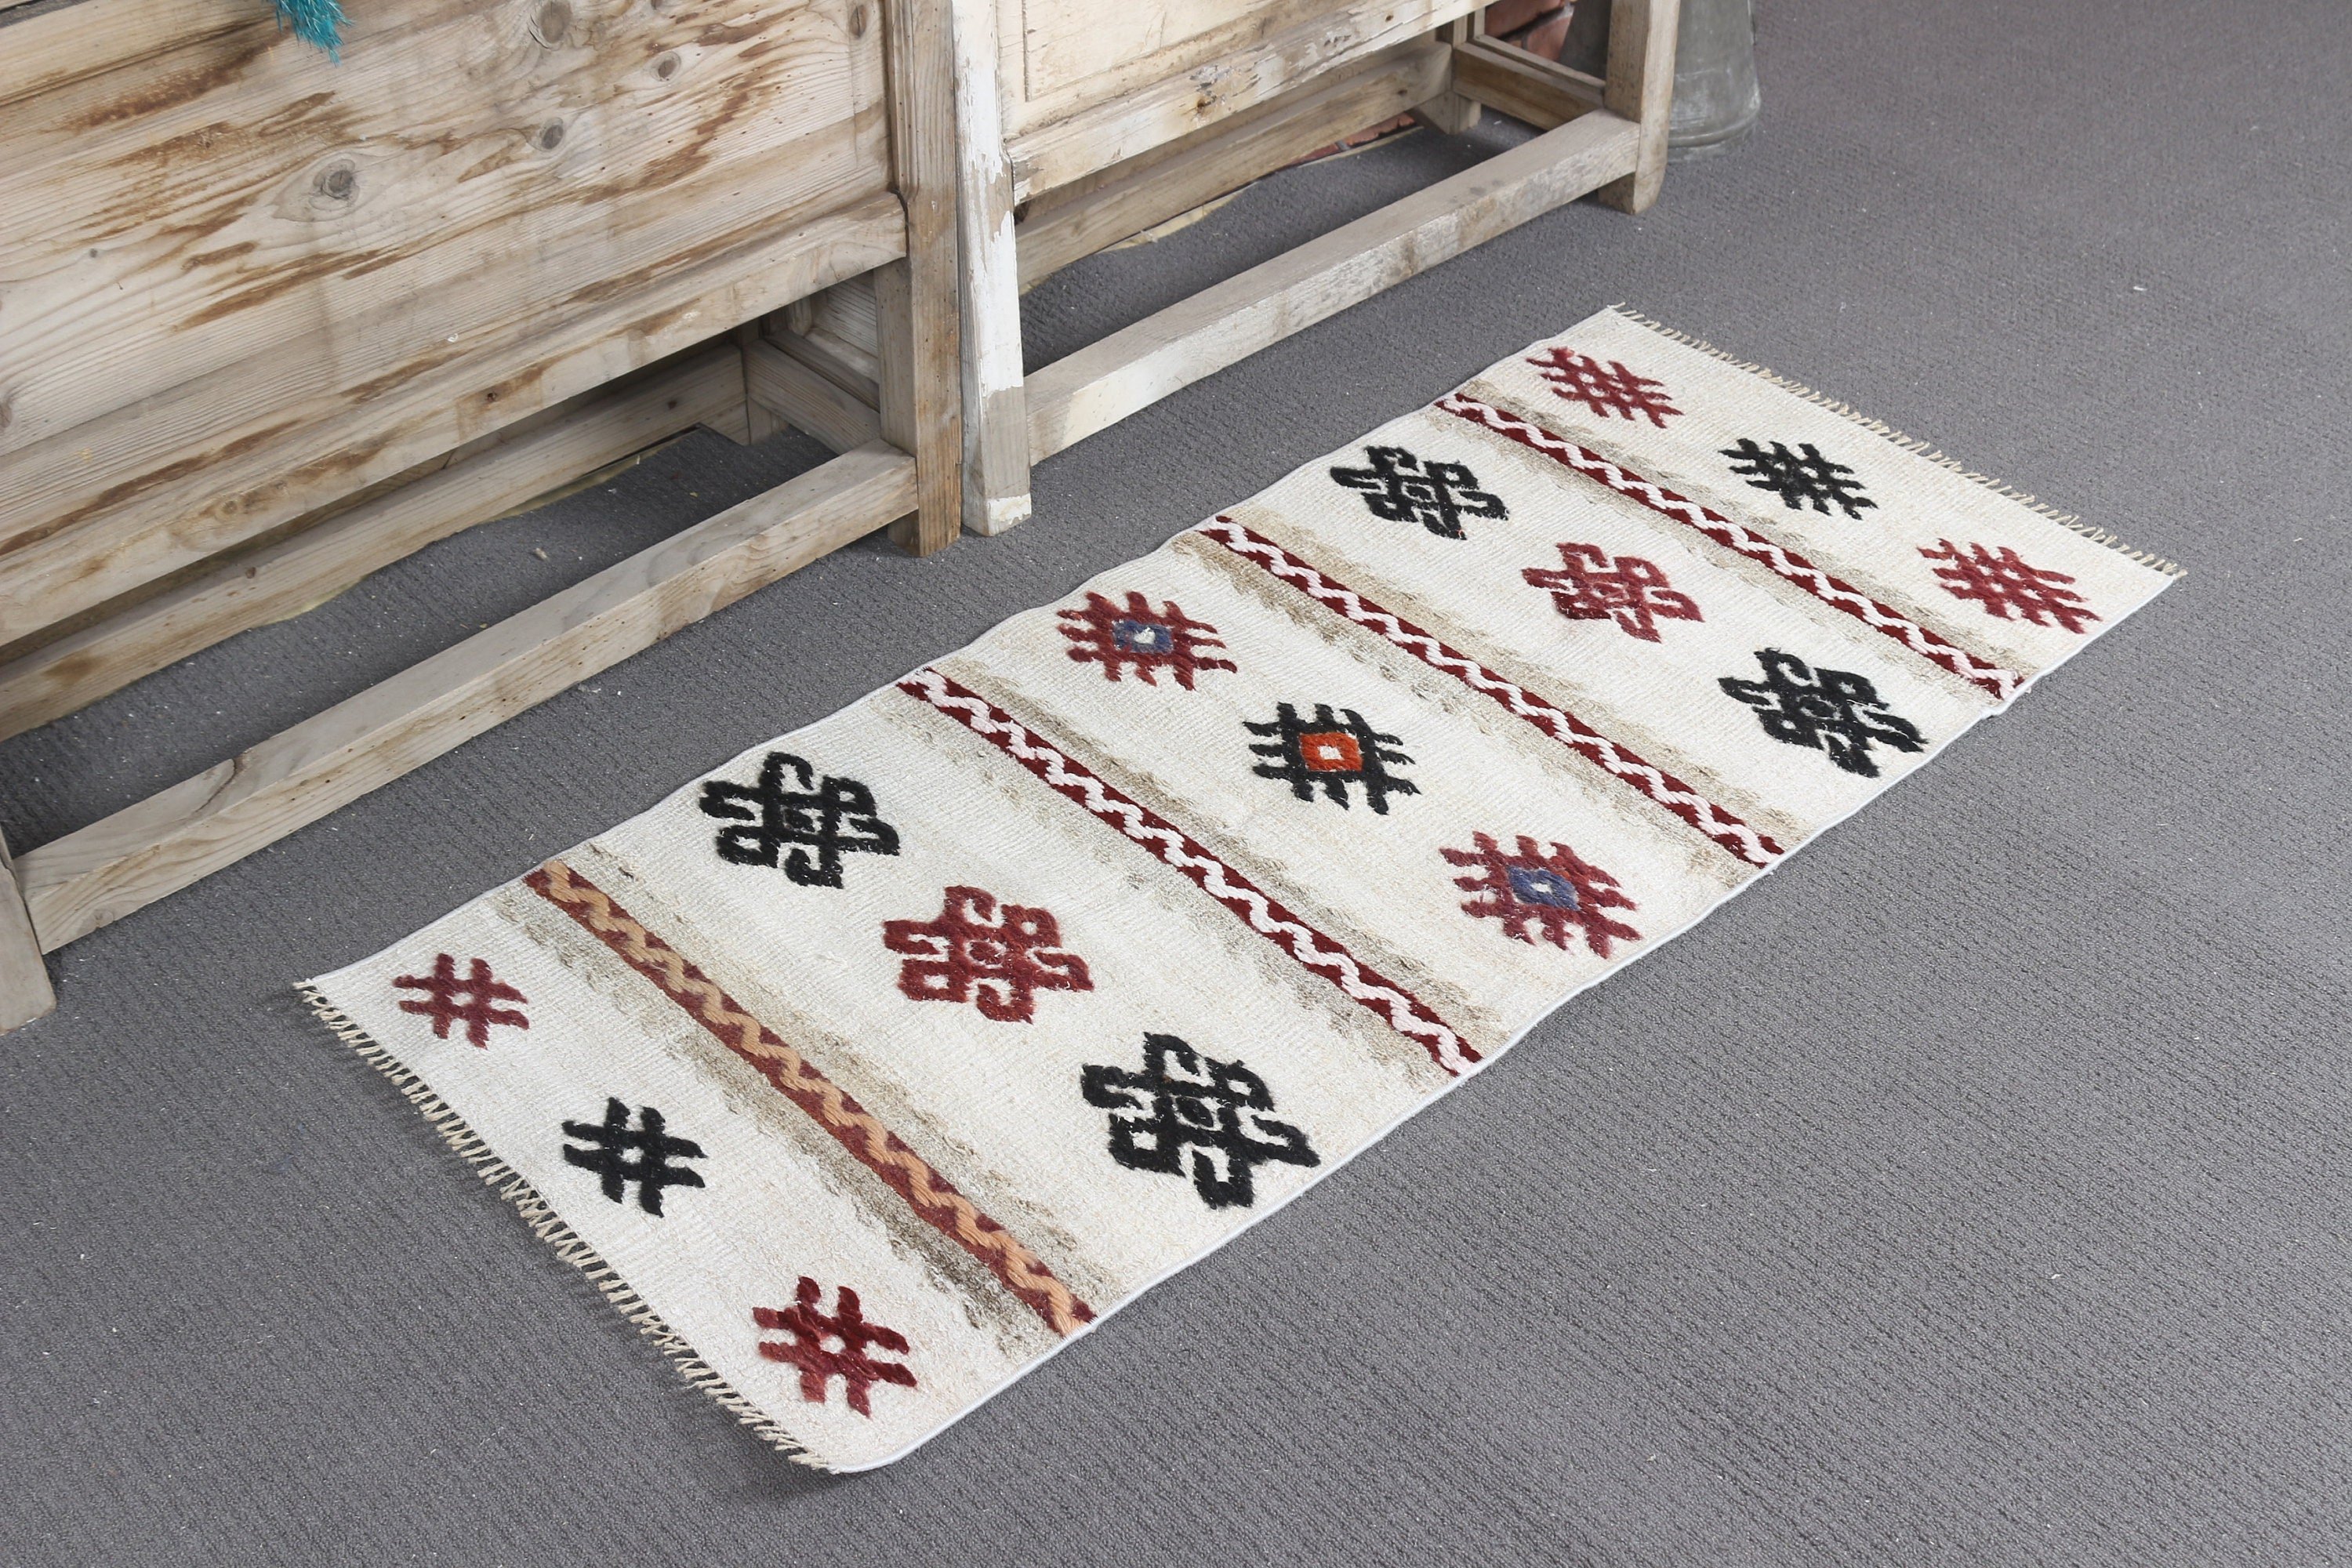 Antique Rugs, Entry Rug, Wool Rugs, Turkish Rug, 1.8x4 ft Small Rug, Old Rug, Vintage Rug, White Wool Rug, Rugs for Entry, Wall Hanging Rug